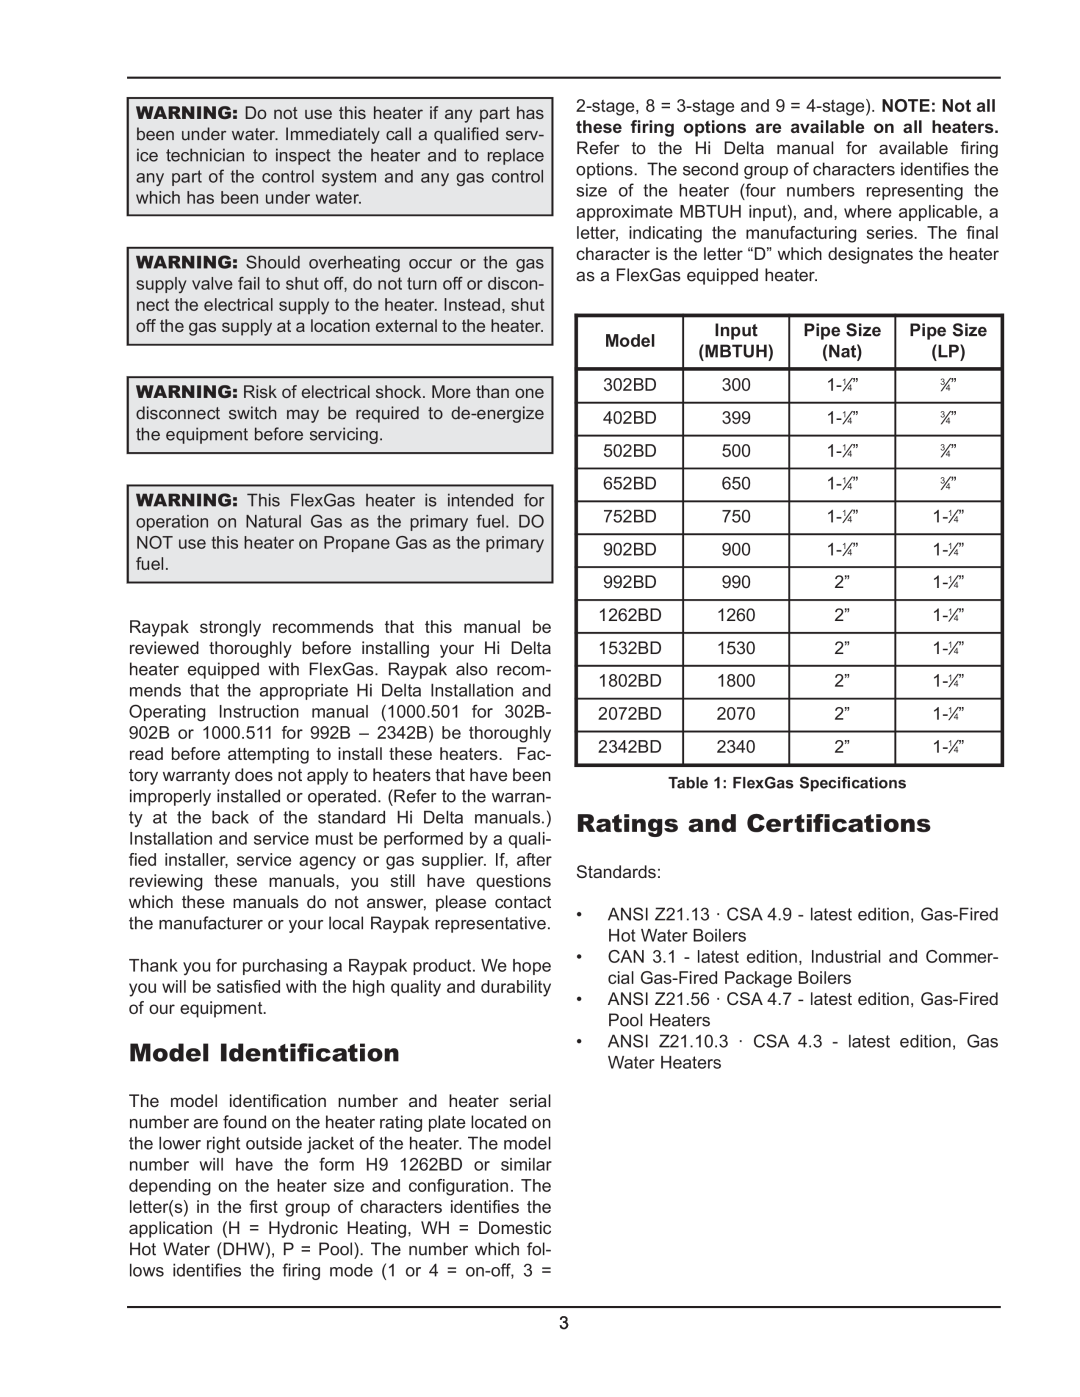 Raypak 302BD-2342BD instruction manual Model Identification, Ratings and Certifications, Input, Pipe Size, Mbtuh 